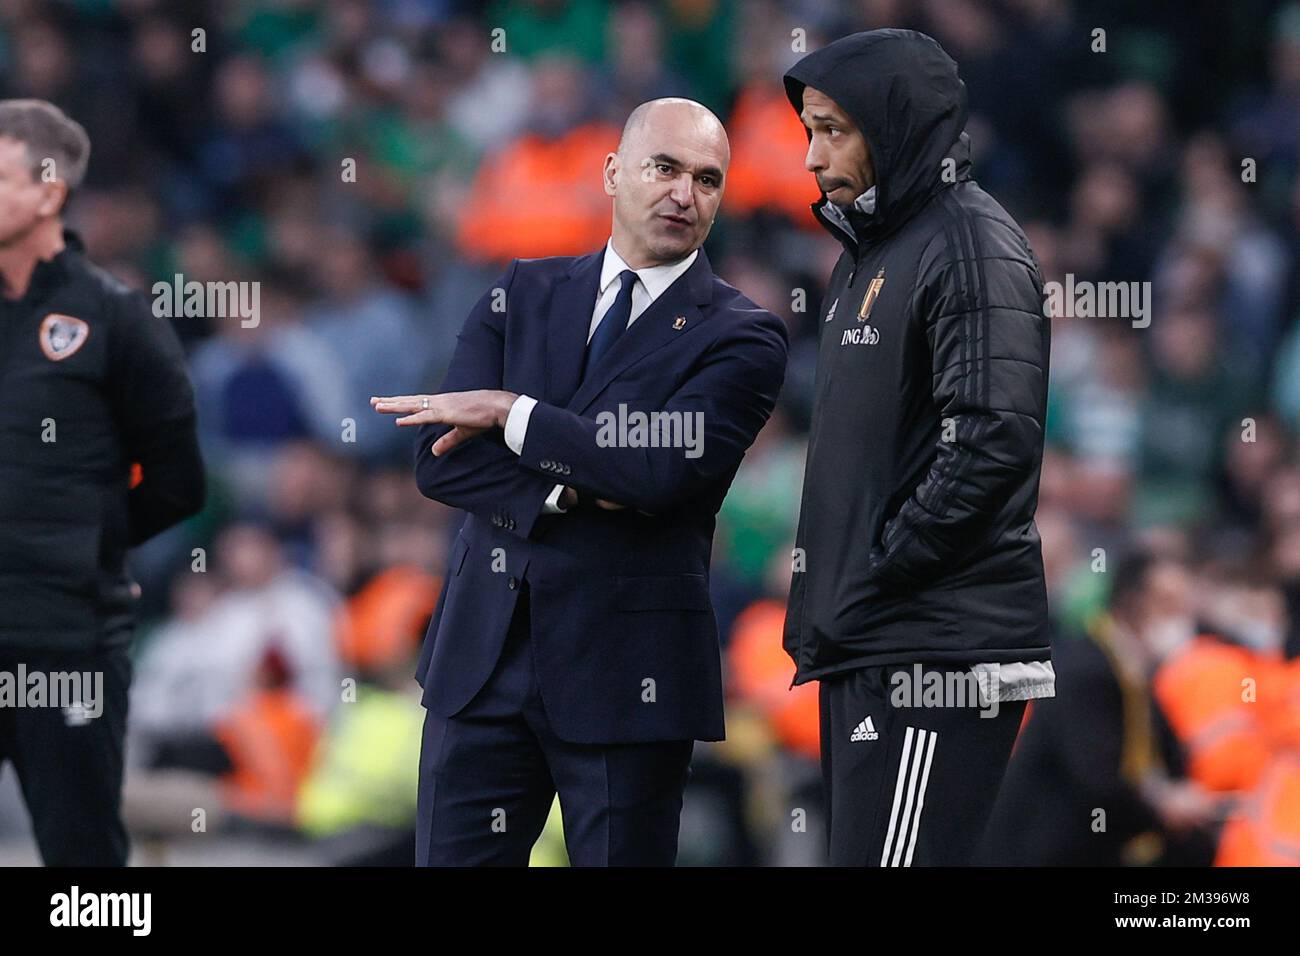 Belgium's head coach Roberto Martinez and Belgium's assistant coach Thierry Henry pictured during a friendly soccer match between Ireland and the Belgian national team, the Red Devils, Saturday 26 March 2022 in Dublin. BELGA PHOTO BRUNO FAHY Stock Photo